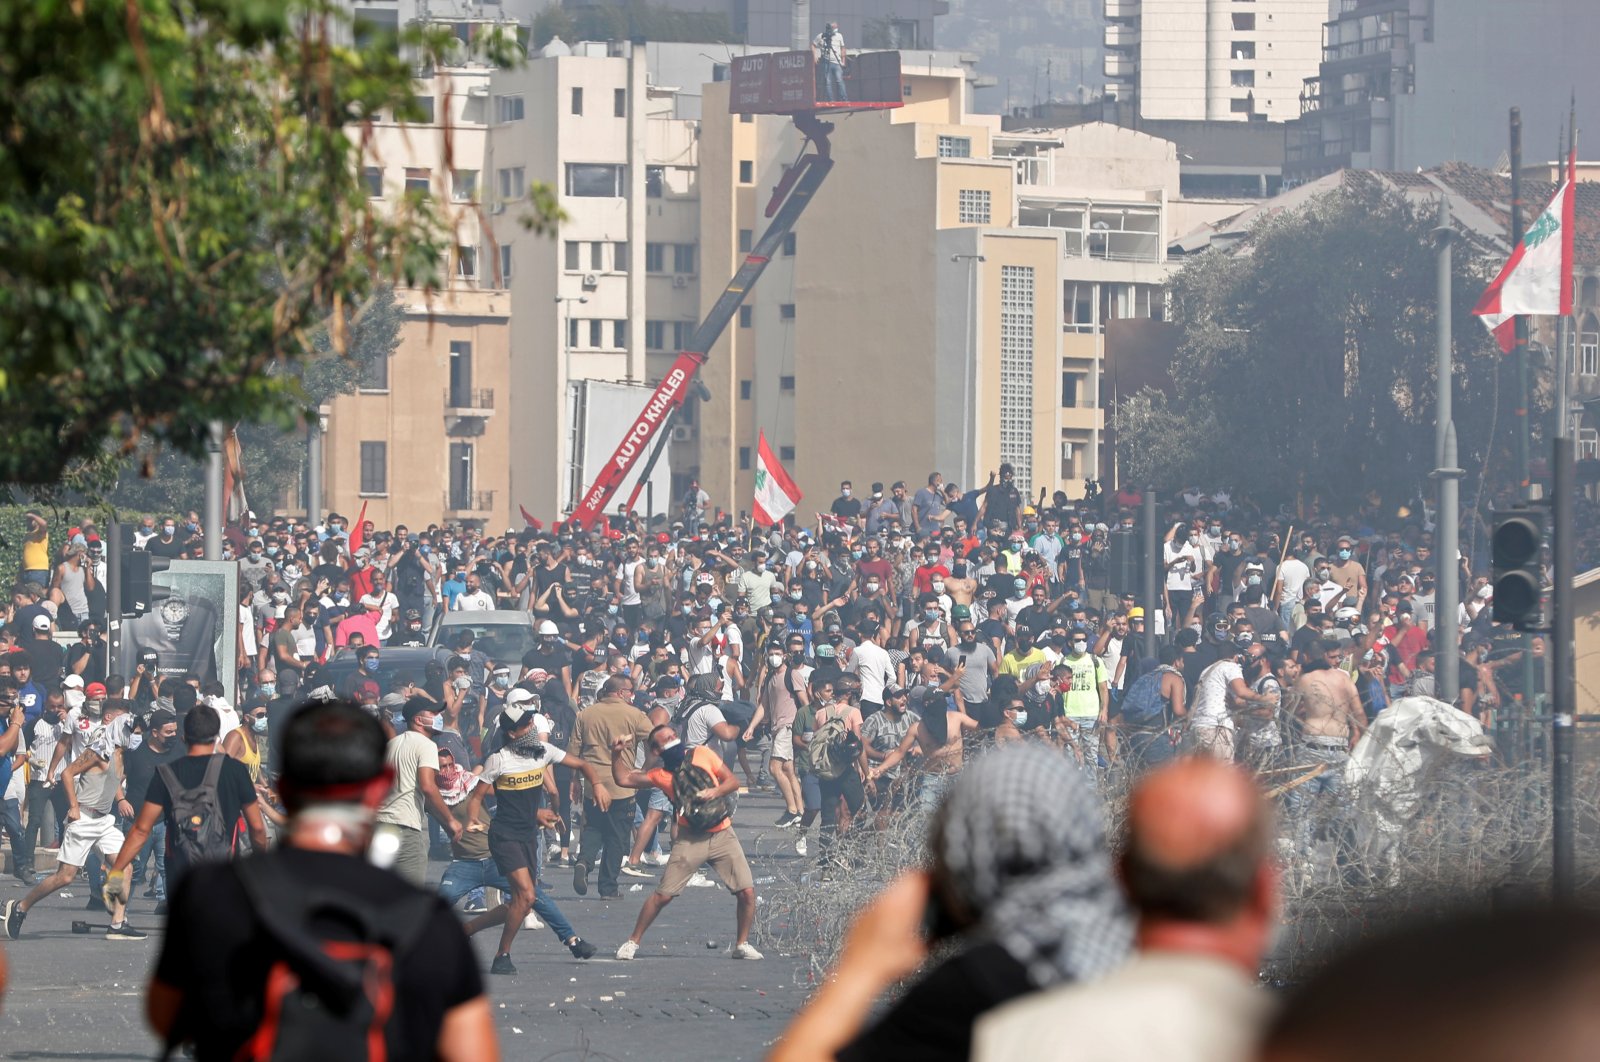 Demonstrators throw stones during a protest as they try to break through a barrier to get to the parliament building following Tuesday's blast, in Beirut, Lebanon August 8, 2020. (REUTERS Photo)